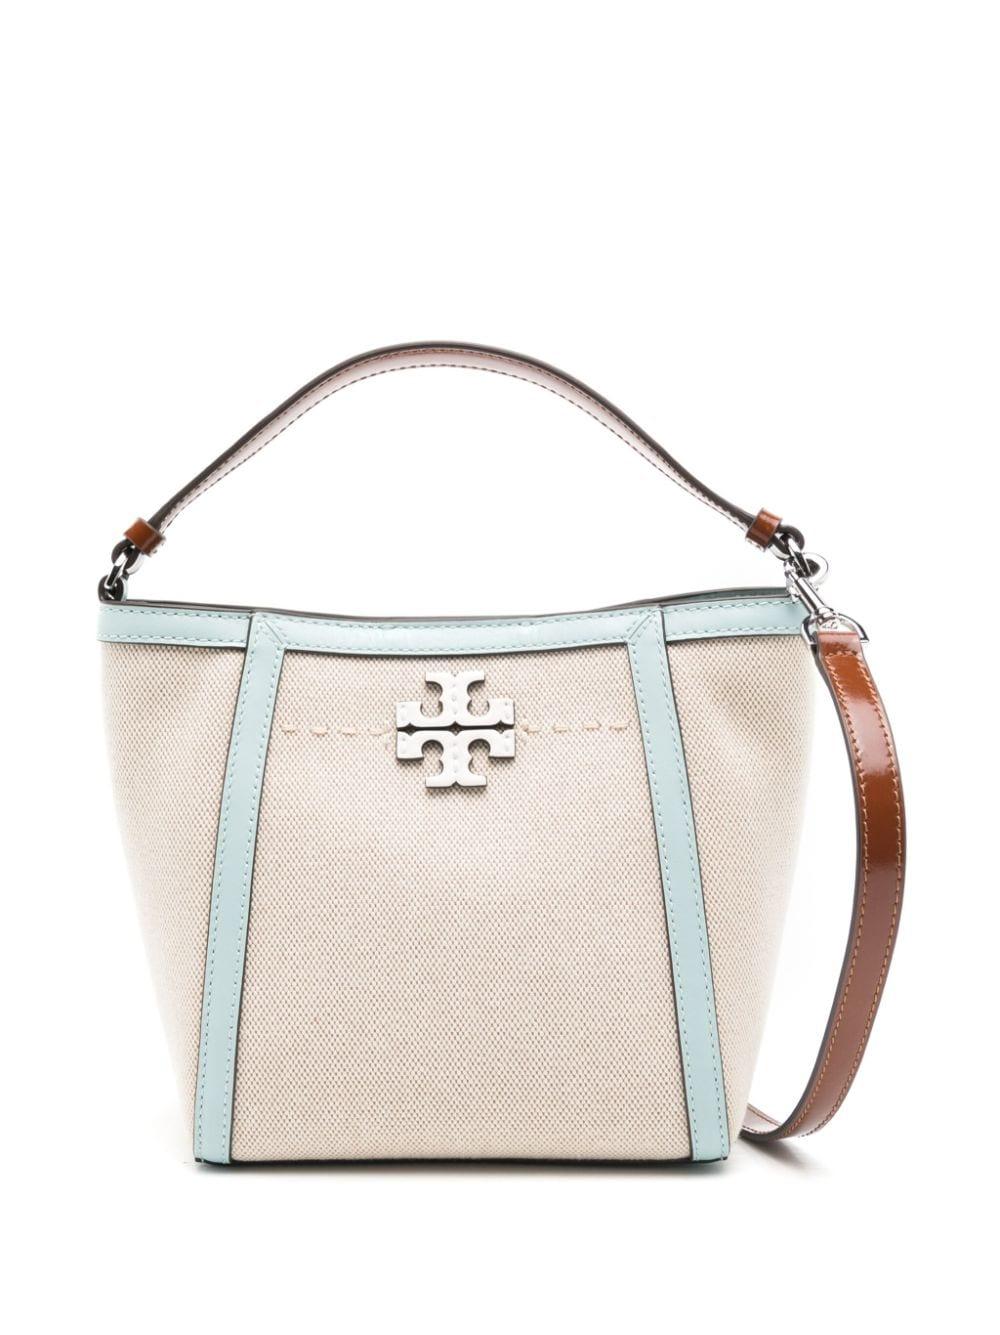 Tory Burch Small Mcgraw Canvas Bucket Bag in White